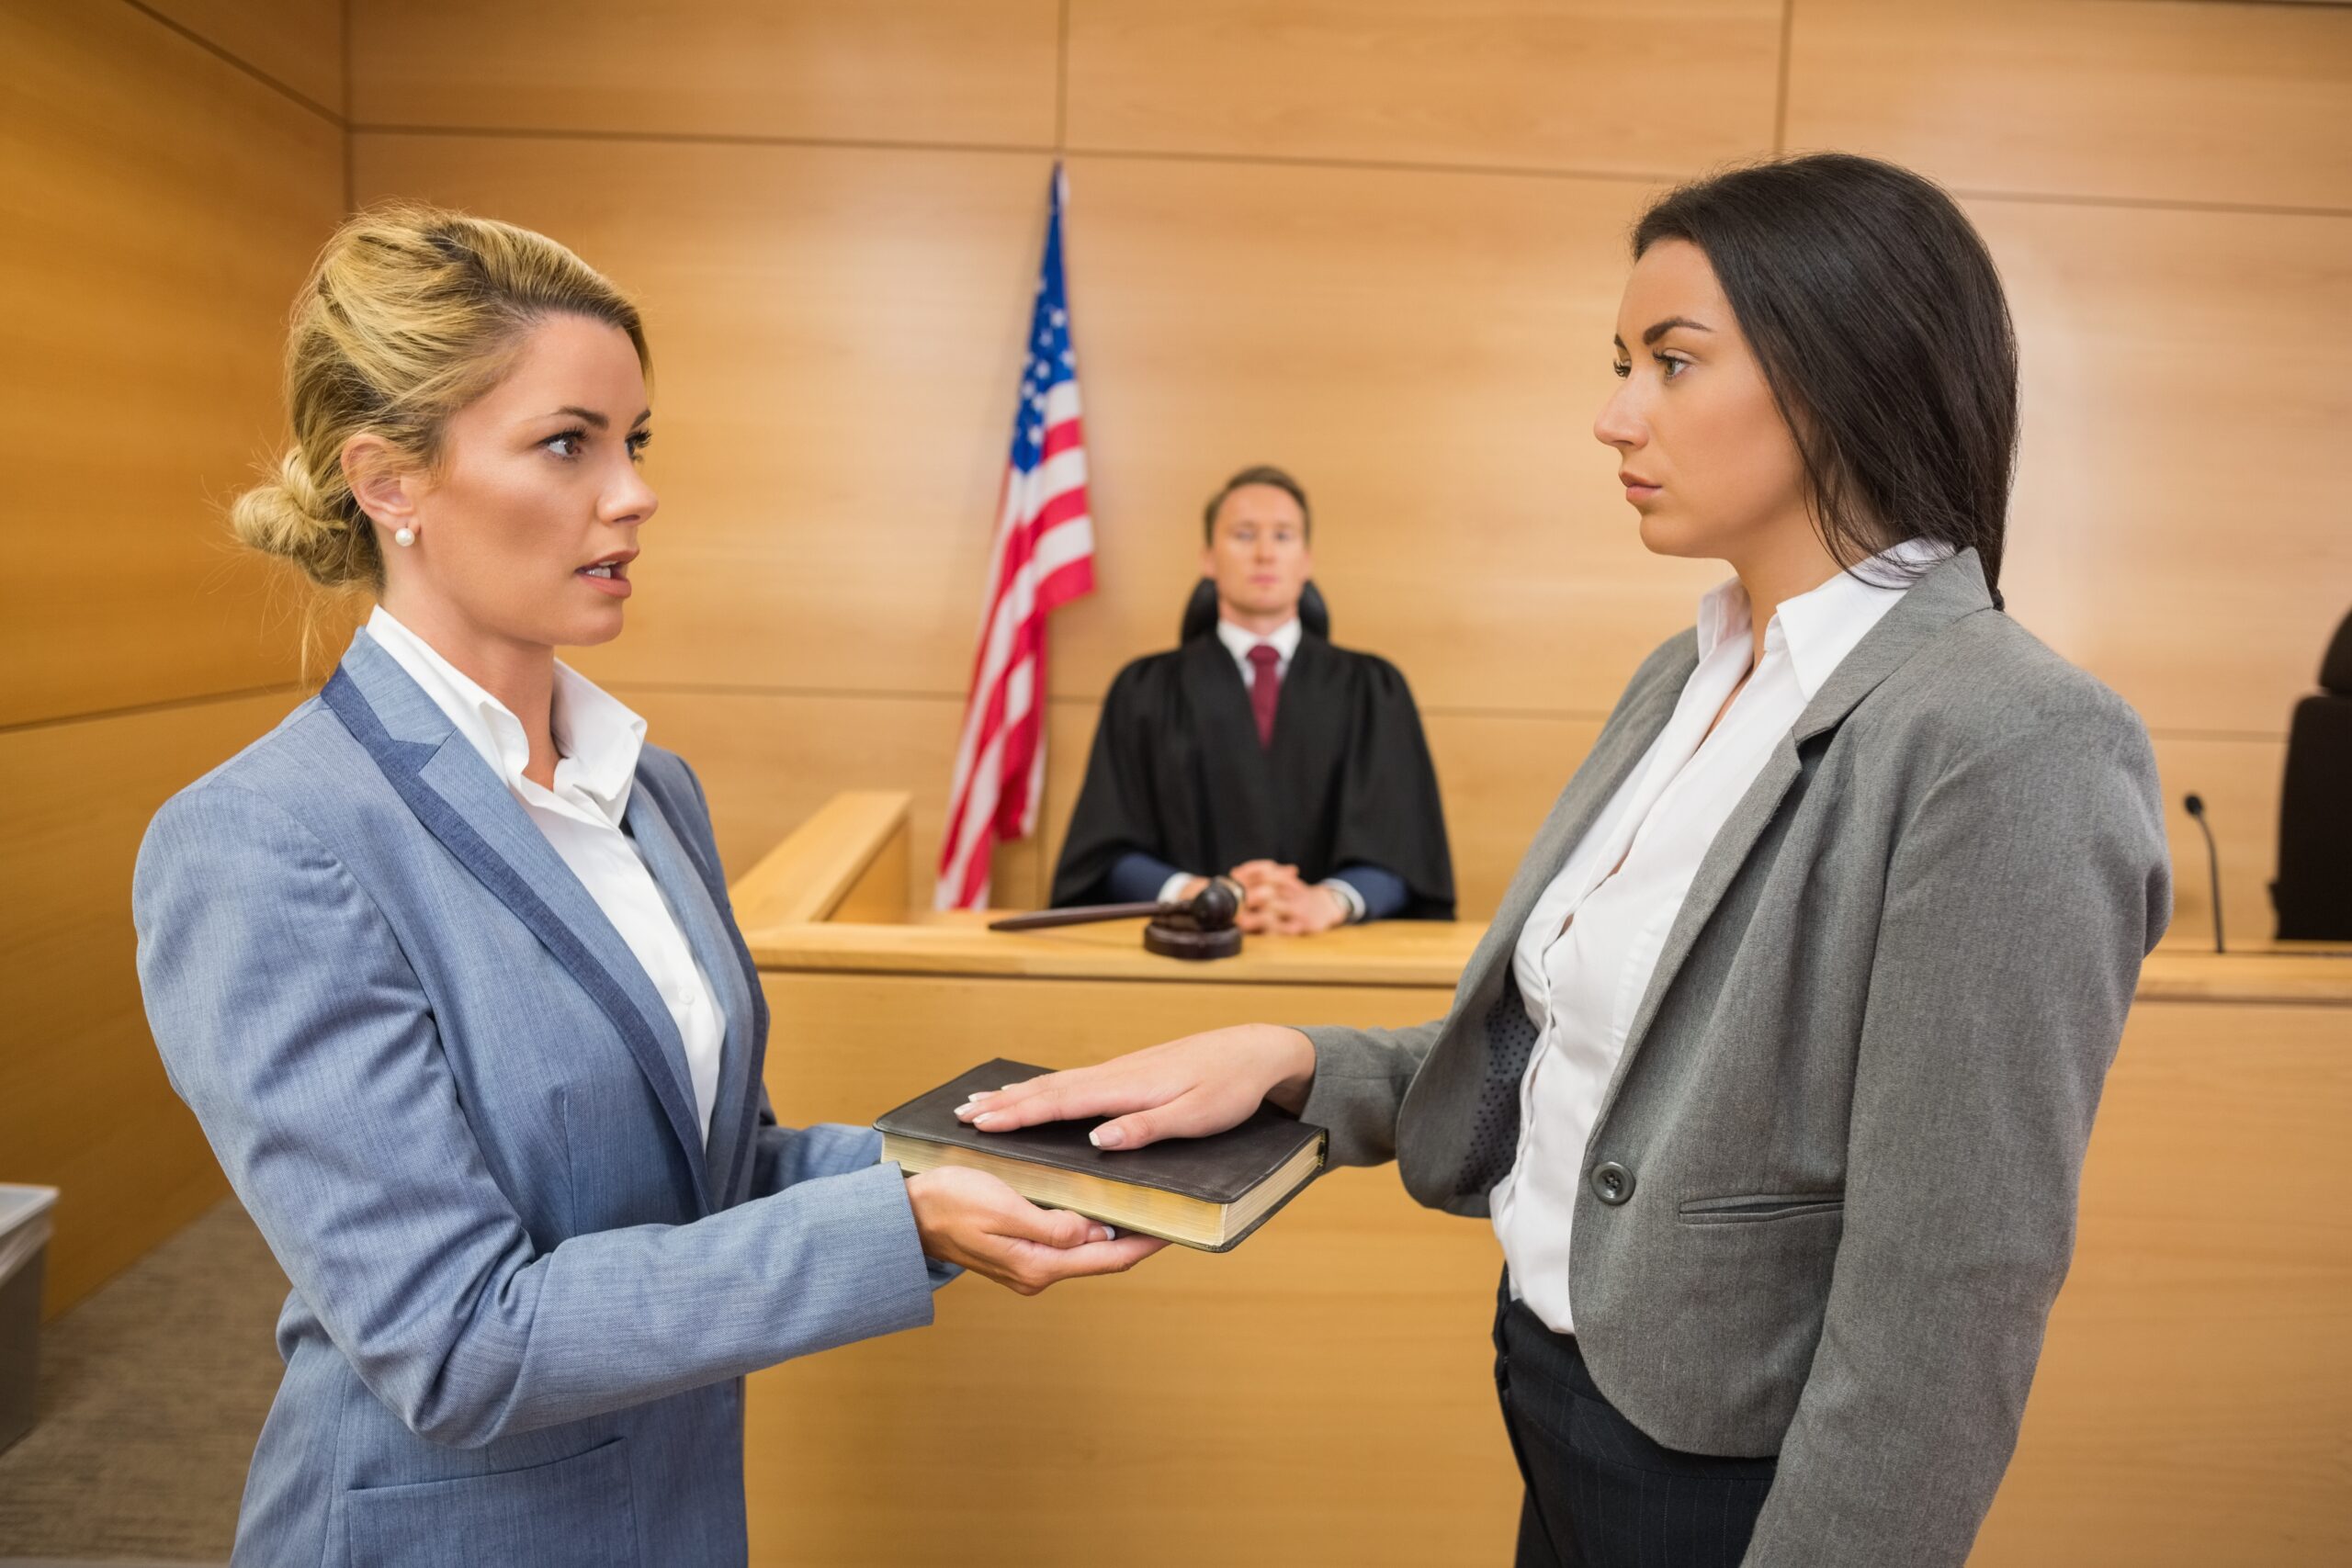 Female witness taking an oath before a male judge prior to testifying